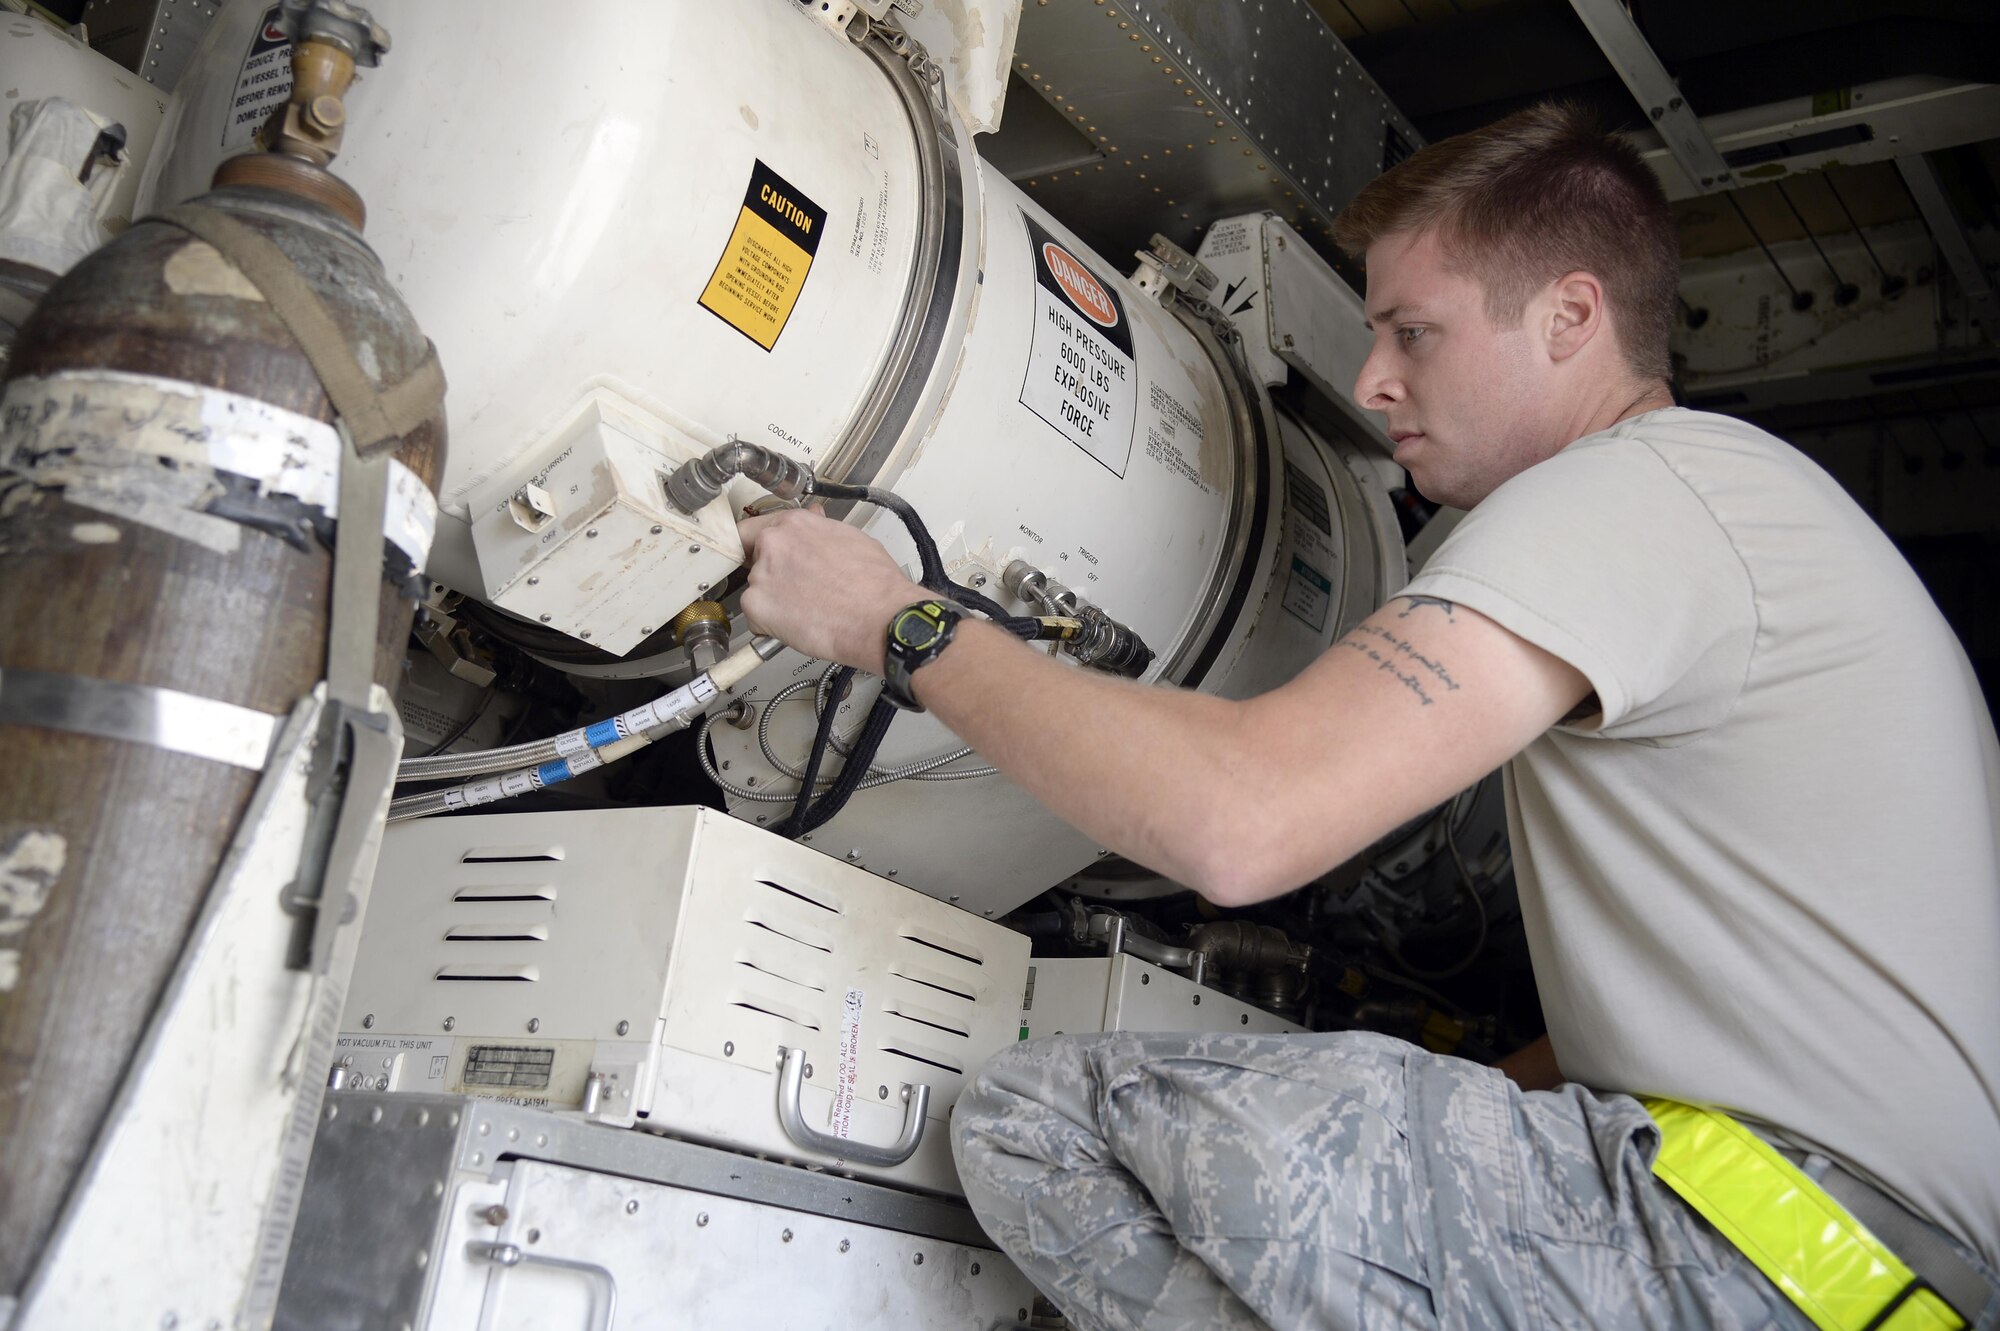 Senior Airman Travis, surveillance and radar technician, ensures the connections to the power amplifier are secure while performing a preflight inspection on an E-3 Sentry airborne warning and control system aircraft at an undisclosed location in Southwest Asia Feb. 24, 2015. The primary mission for surveillance and radar technicians is to make sure the aircrews have reliable radar in the air so they can command and control aircraft. Travis is currently deployed from Tinker AFB, Okla., and is a native of Snohomish, Wash. (U.S. Air Force photo/Tech. Sgt. Marie Brown)